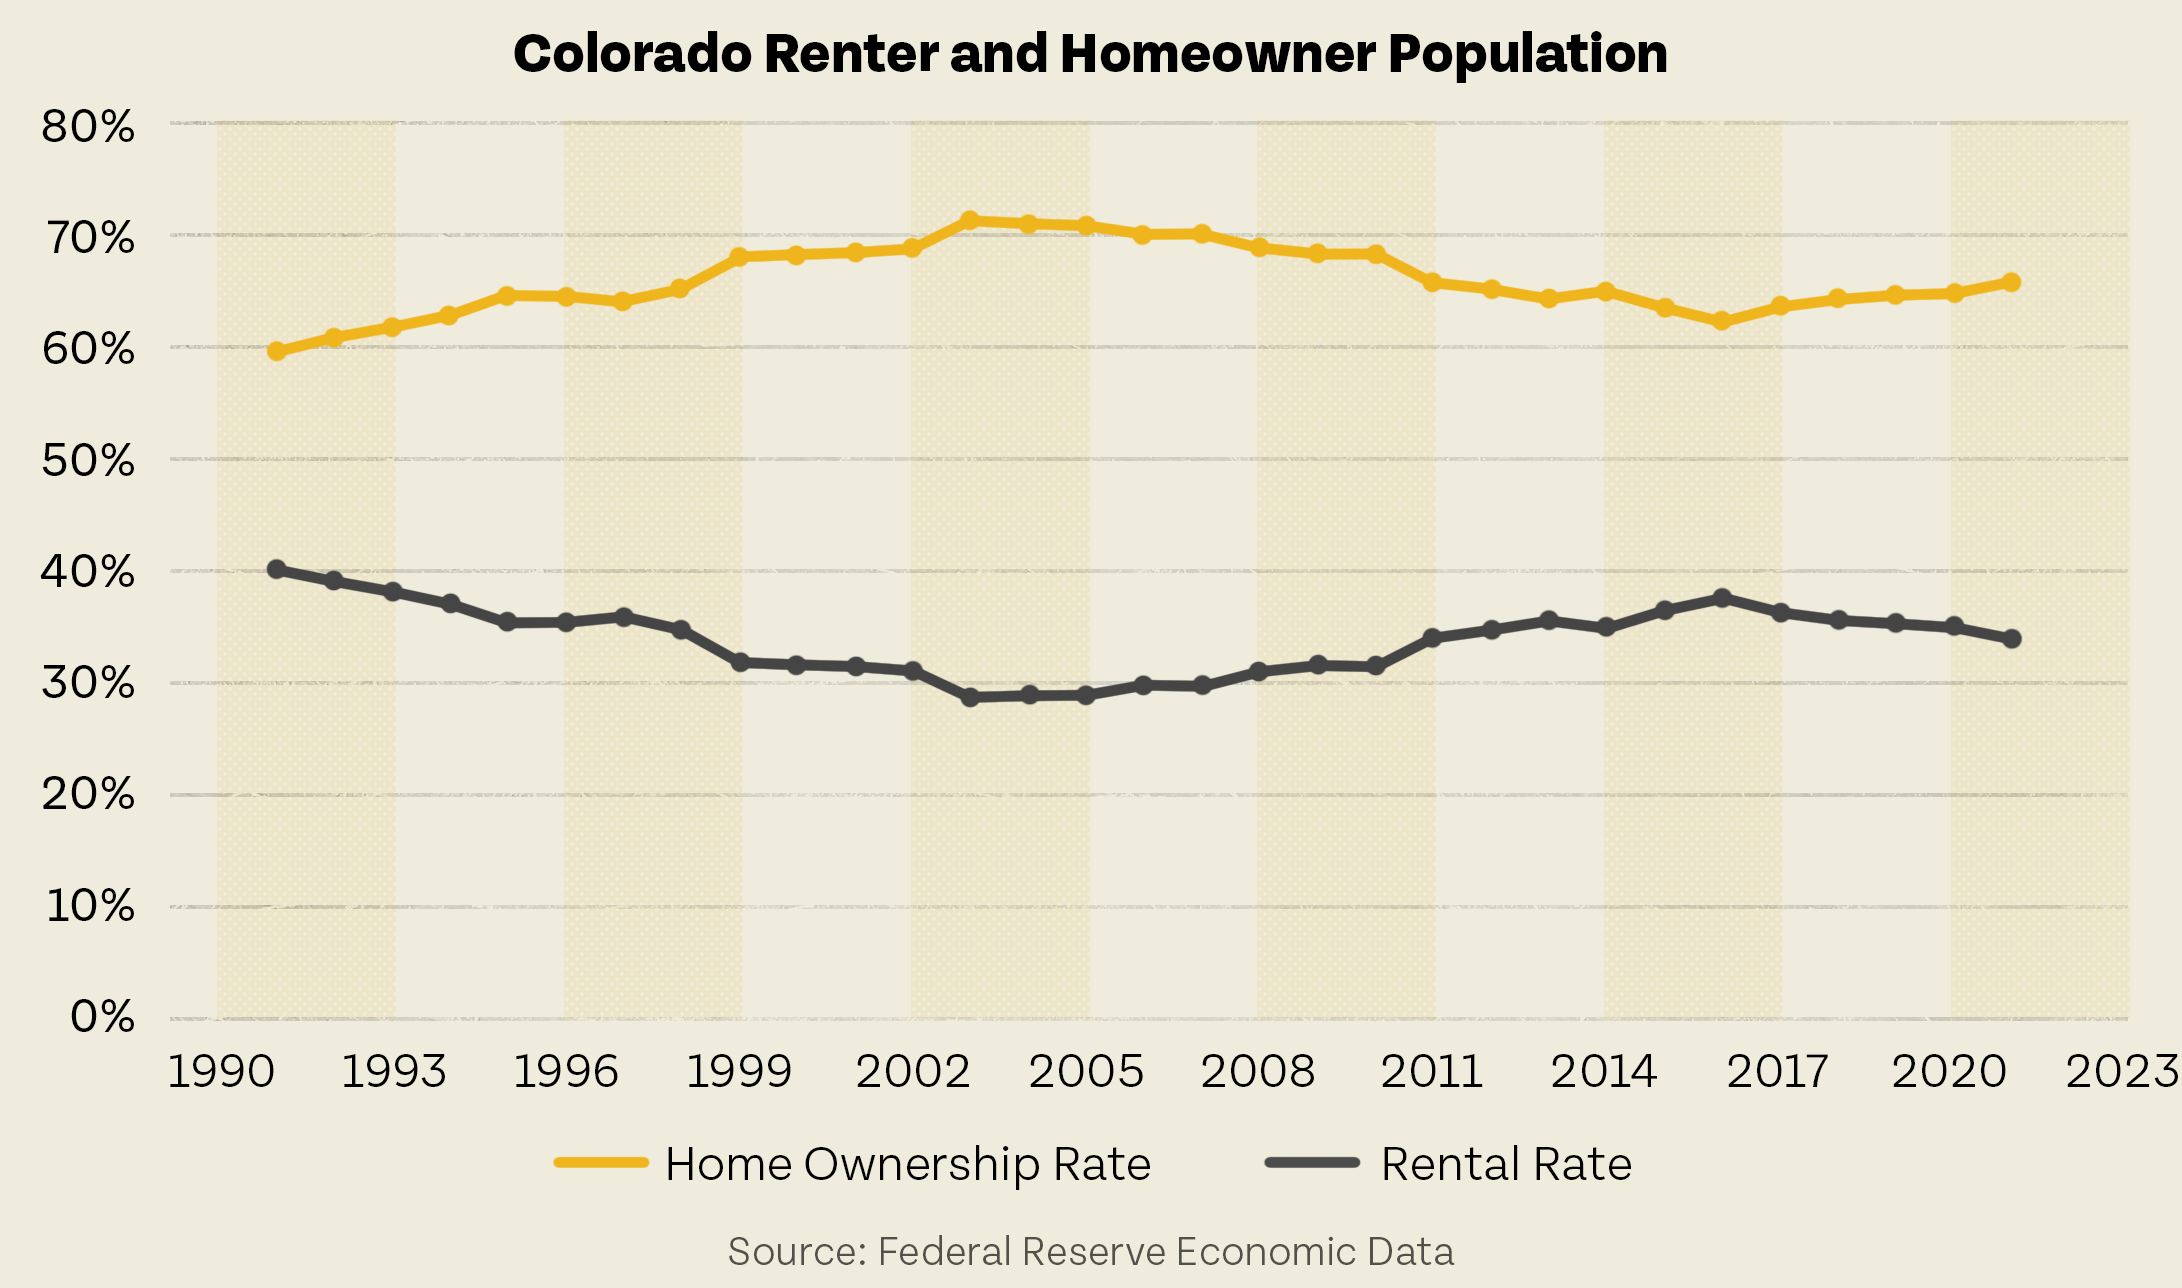 Line graph showing the trends of home ownership rate and rental rate in Colorado from 1990 to 2023, with home ownership consistently higher than renting. This graph is part of the broader Colorado Housing